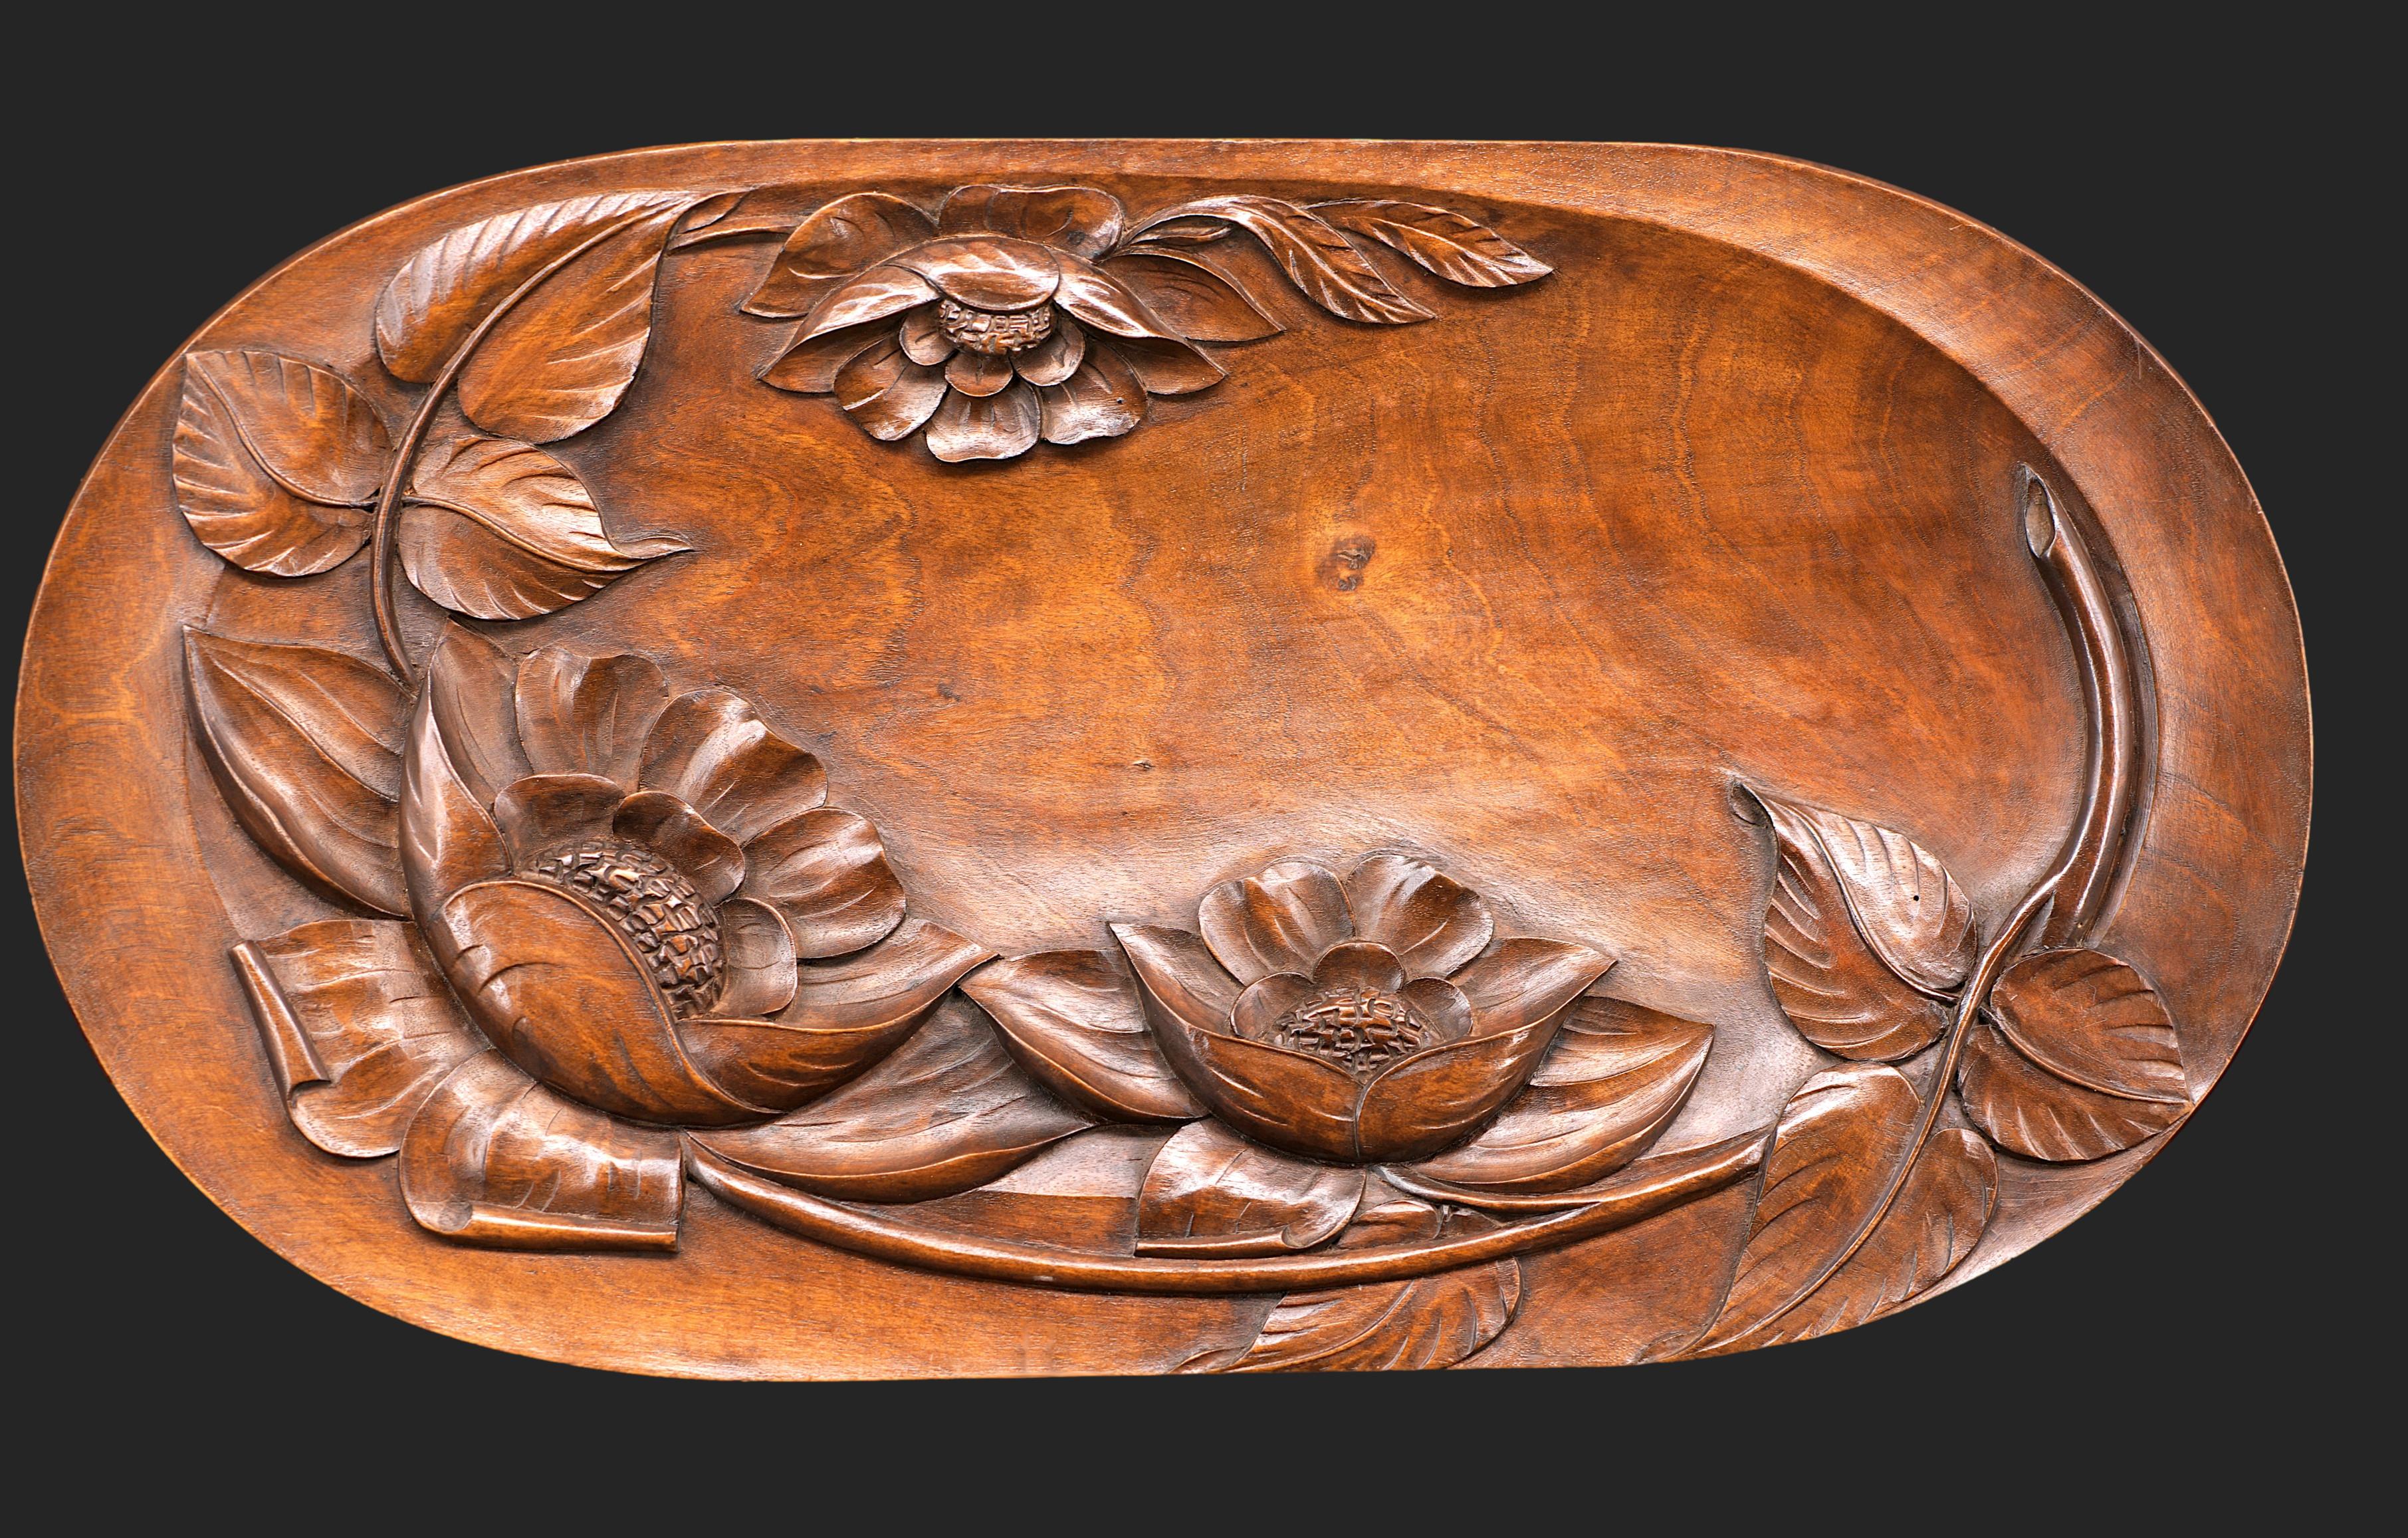 French Art Deco fruit tray,  France, 1920s. Centerpiece. Multi-usages. Carved walnut. Floral decor. Width: 23